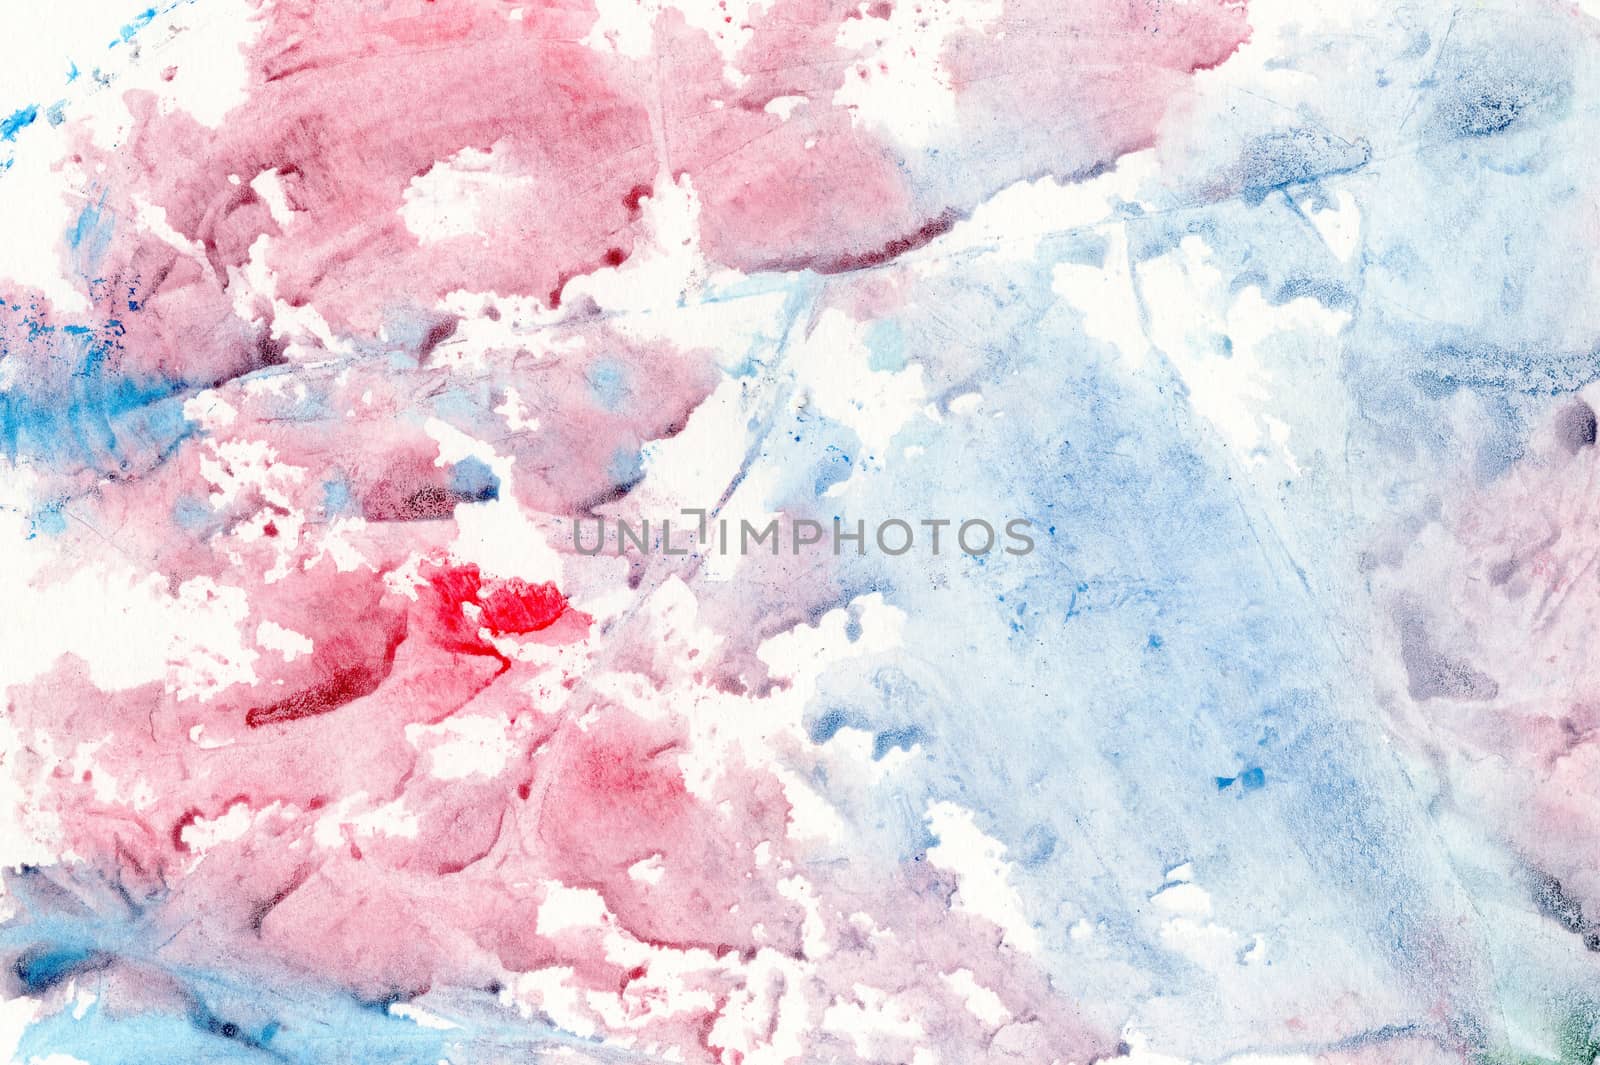 Abstract background of watercolor on paper texture, hand painted in blue and red